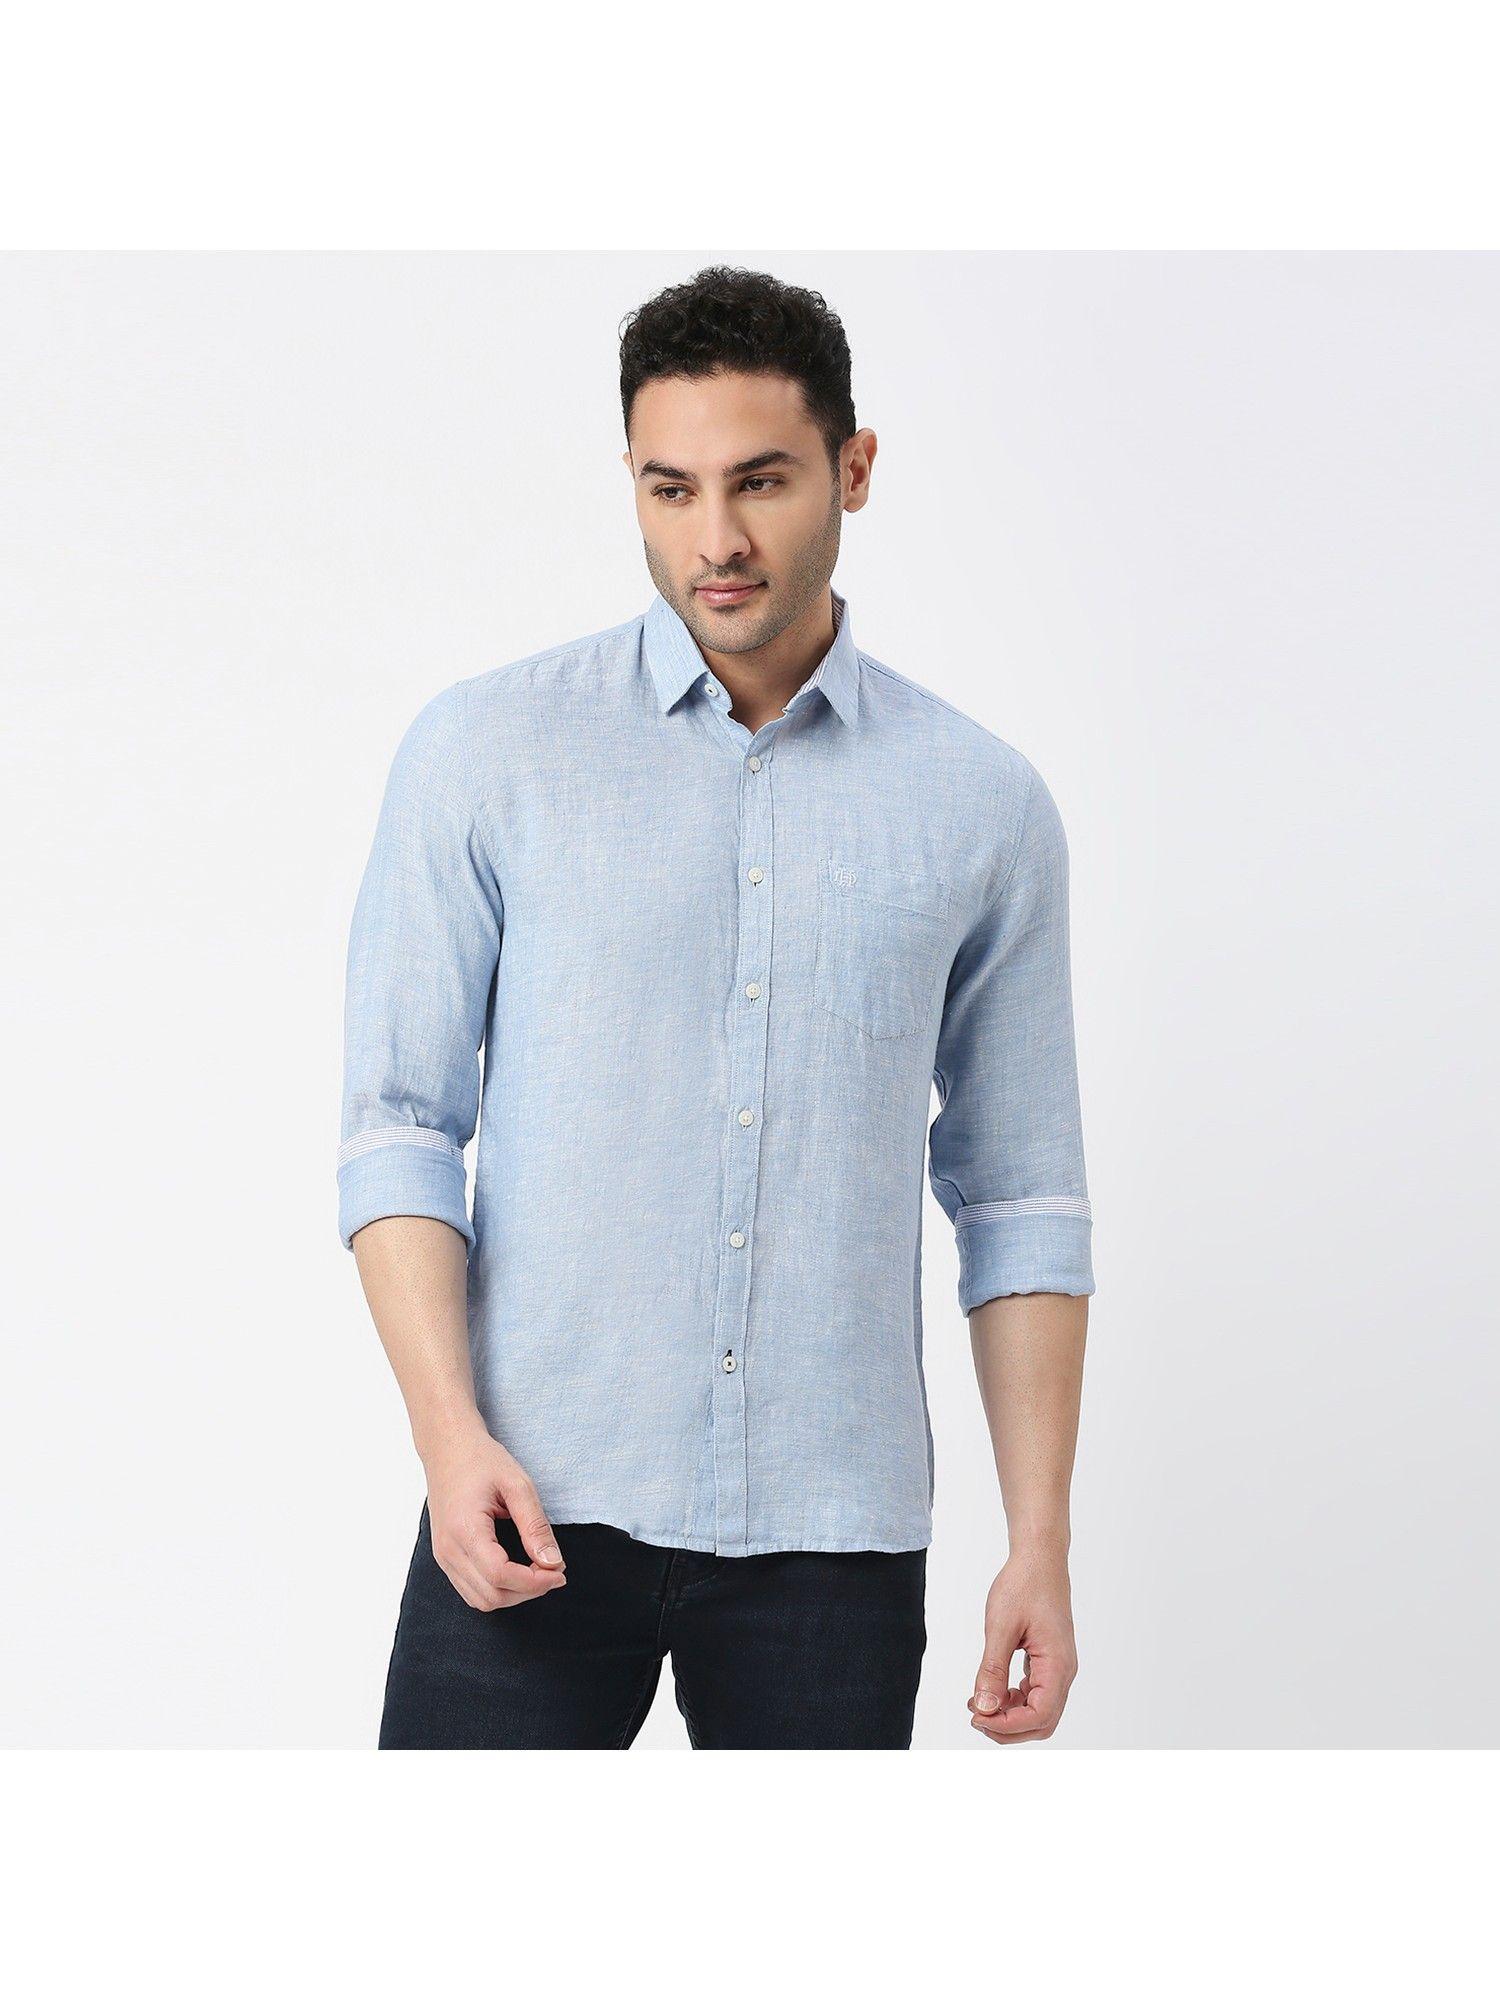 full sleeves sky blue pure linen shirt with pocket